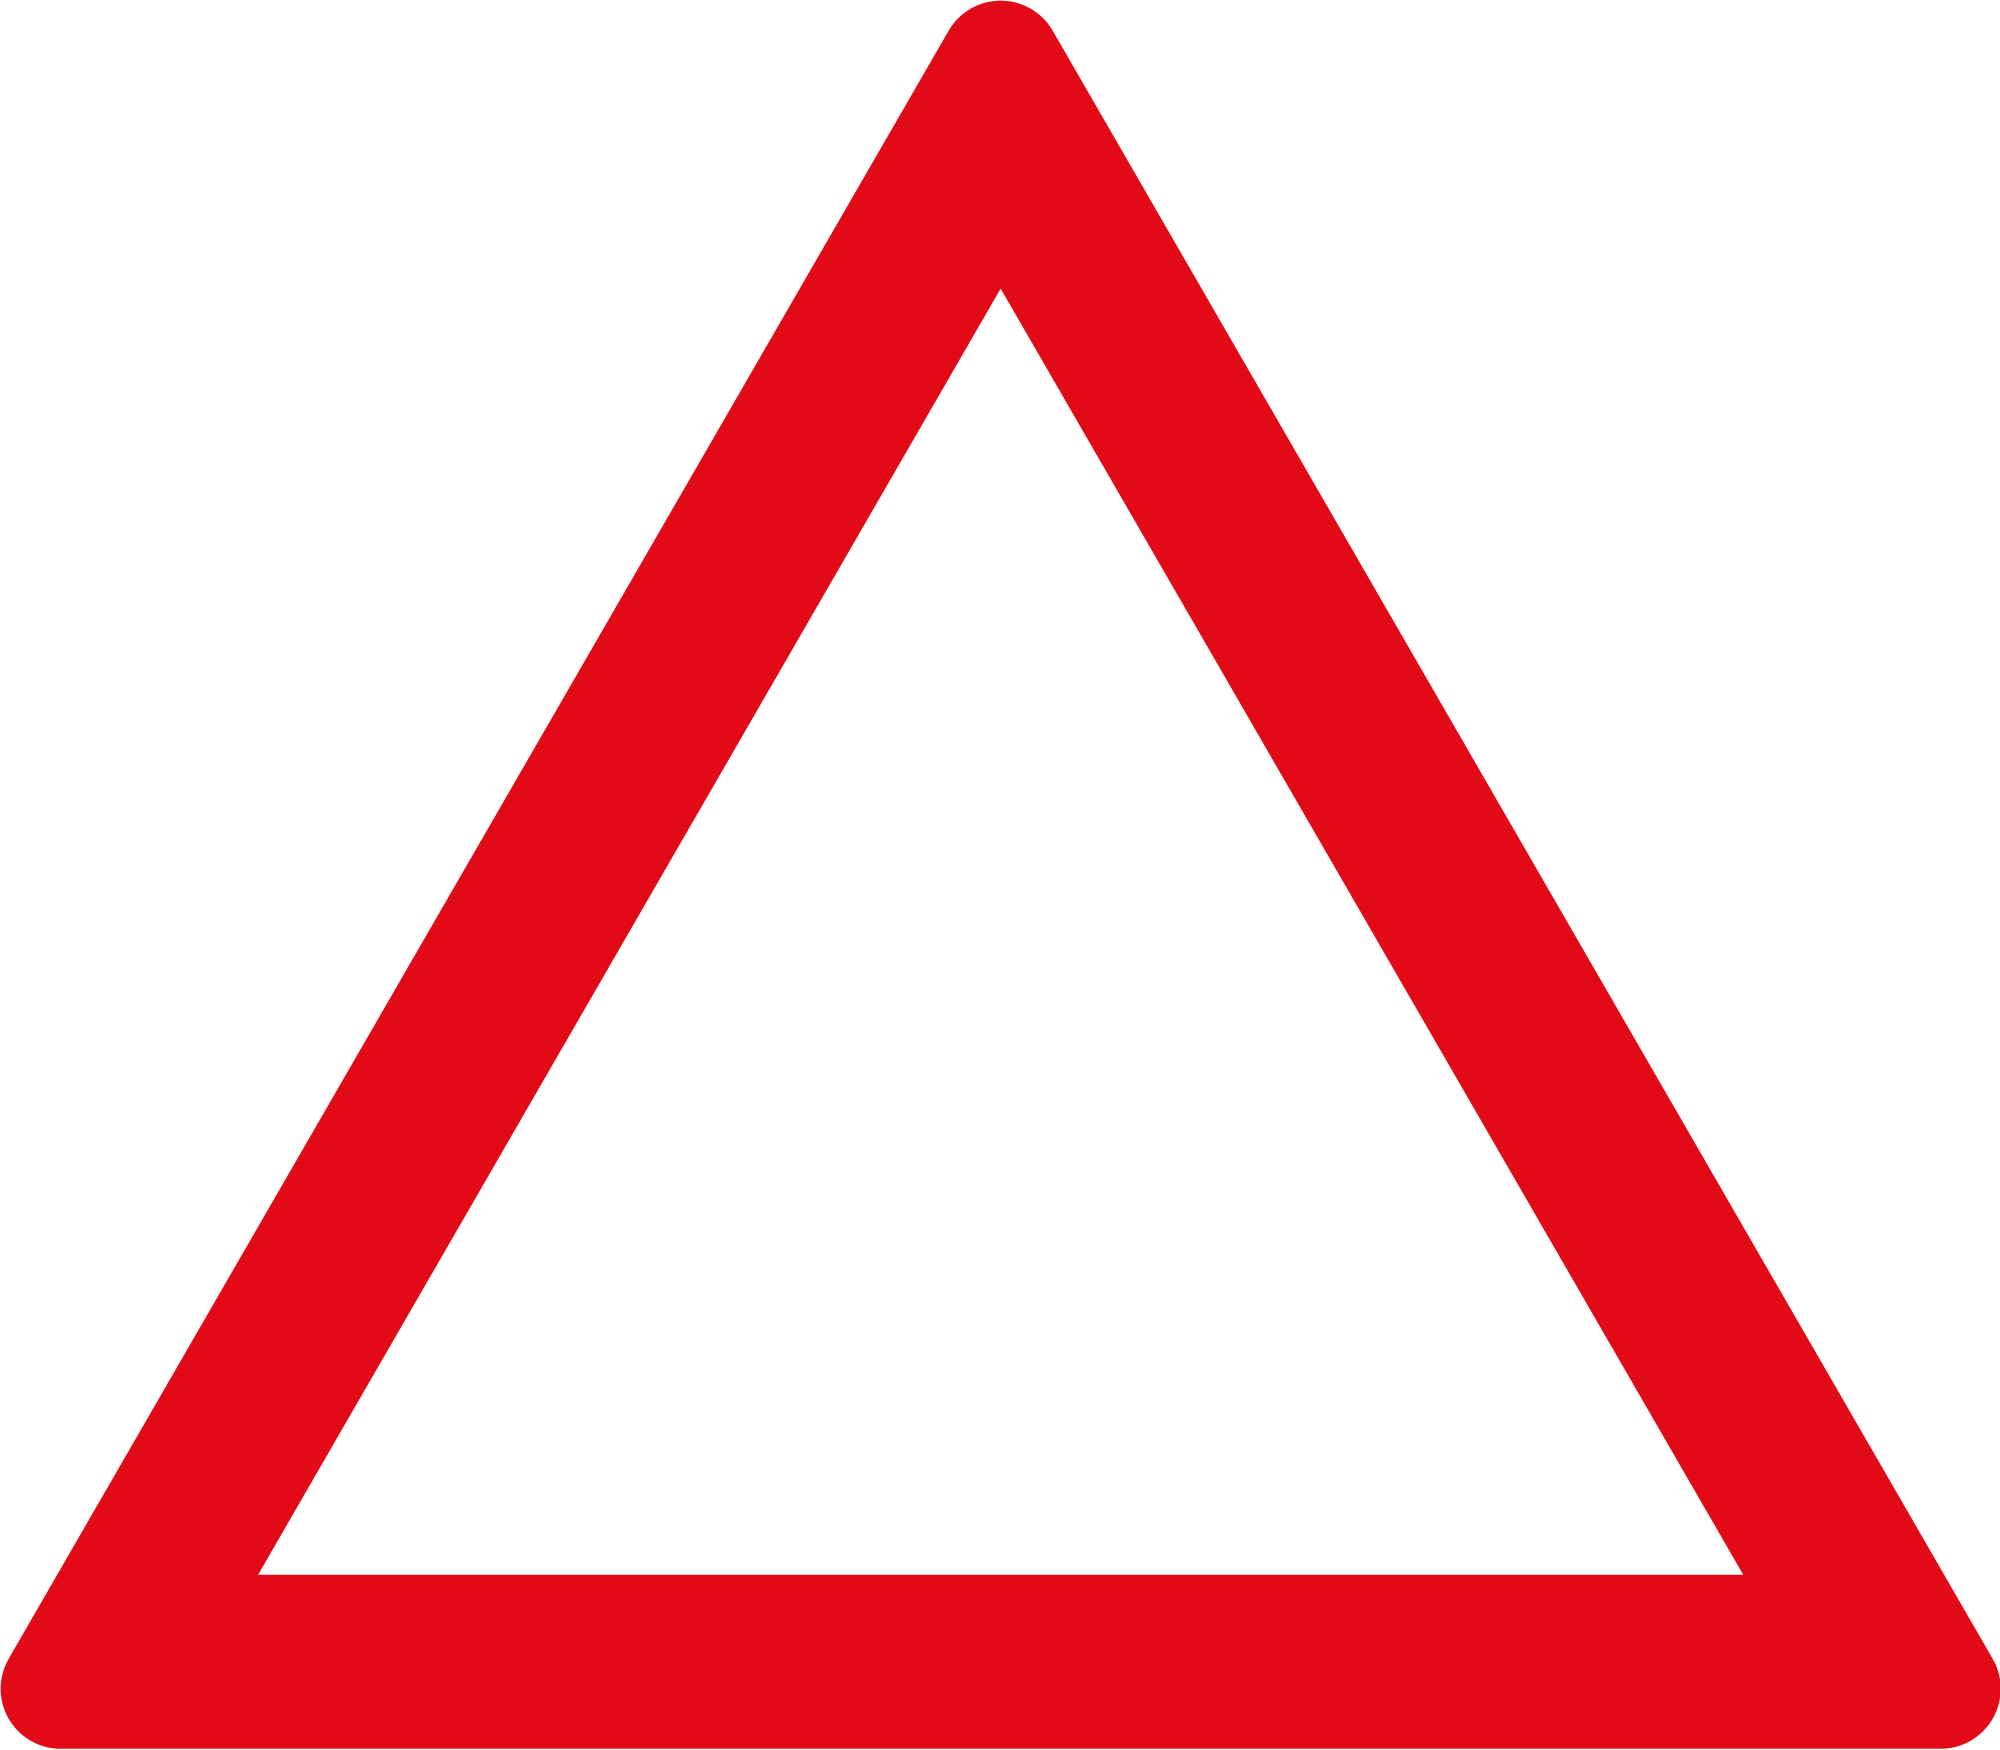 Red Triangle White Line Logo - File:Triangle warning sign (red and white).svg - Wikimedia Commons